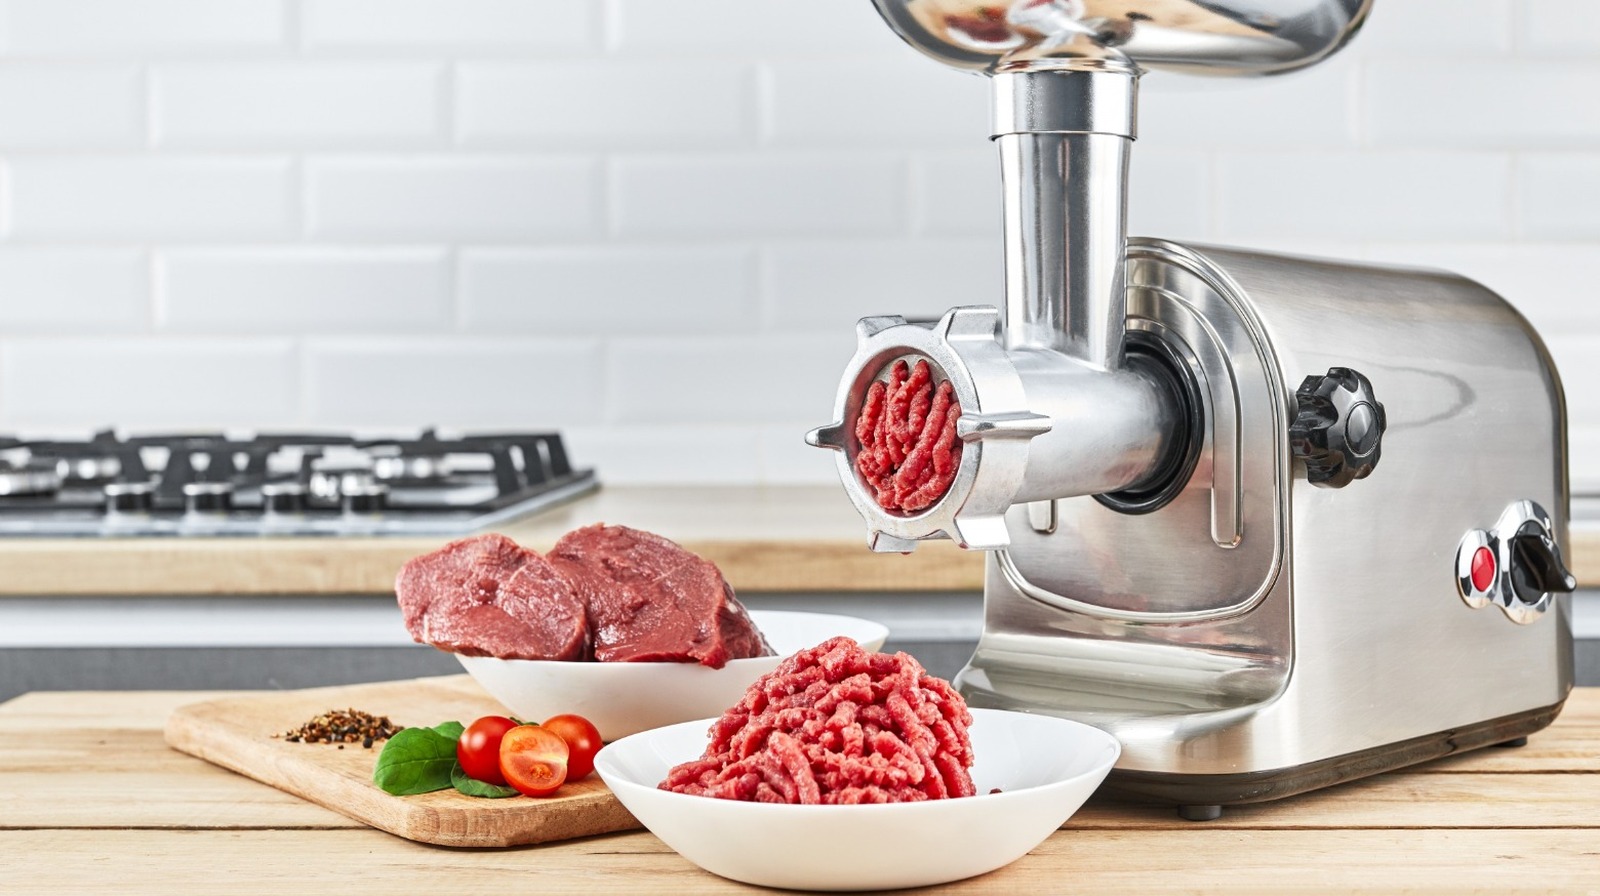 https://www.mashed.com/img/gallery/the-best-way-to-grind-beef-according-to-science/l-intro-1656344463.jpg